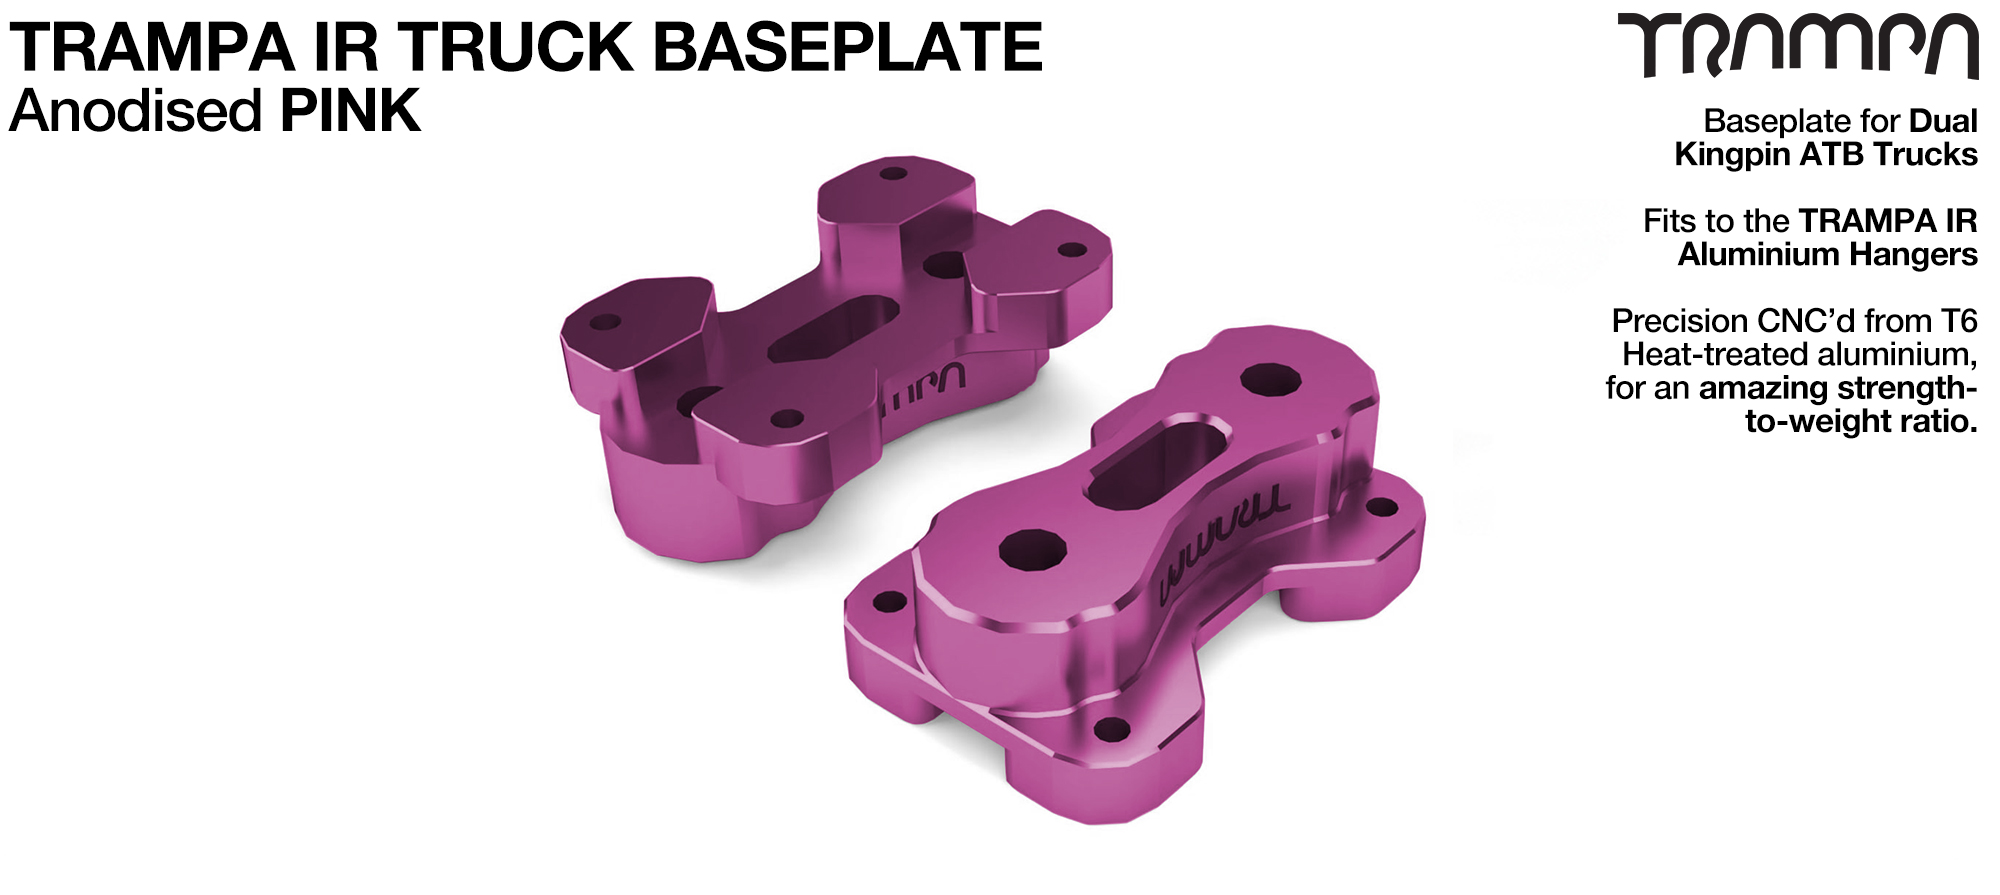 TRAMPA IR BASEPLATE - CNC Precision made TRAMPA IR Trucks are super light & Packed with performance - PINK